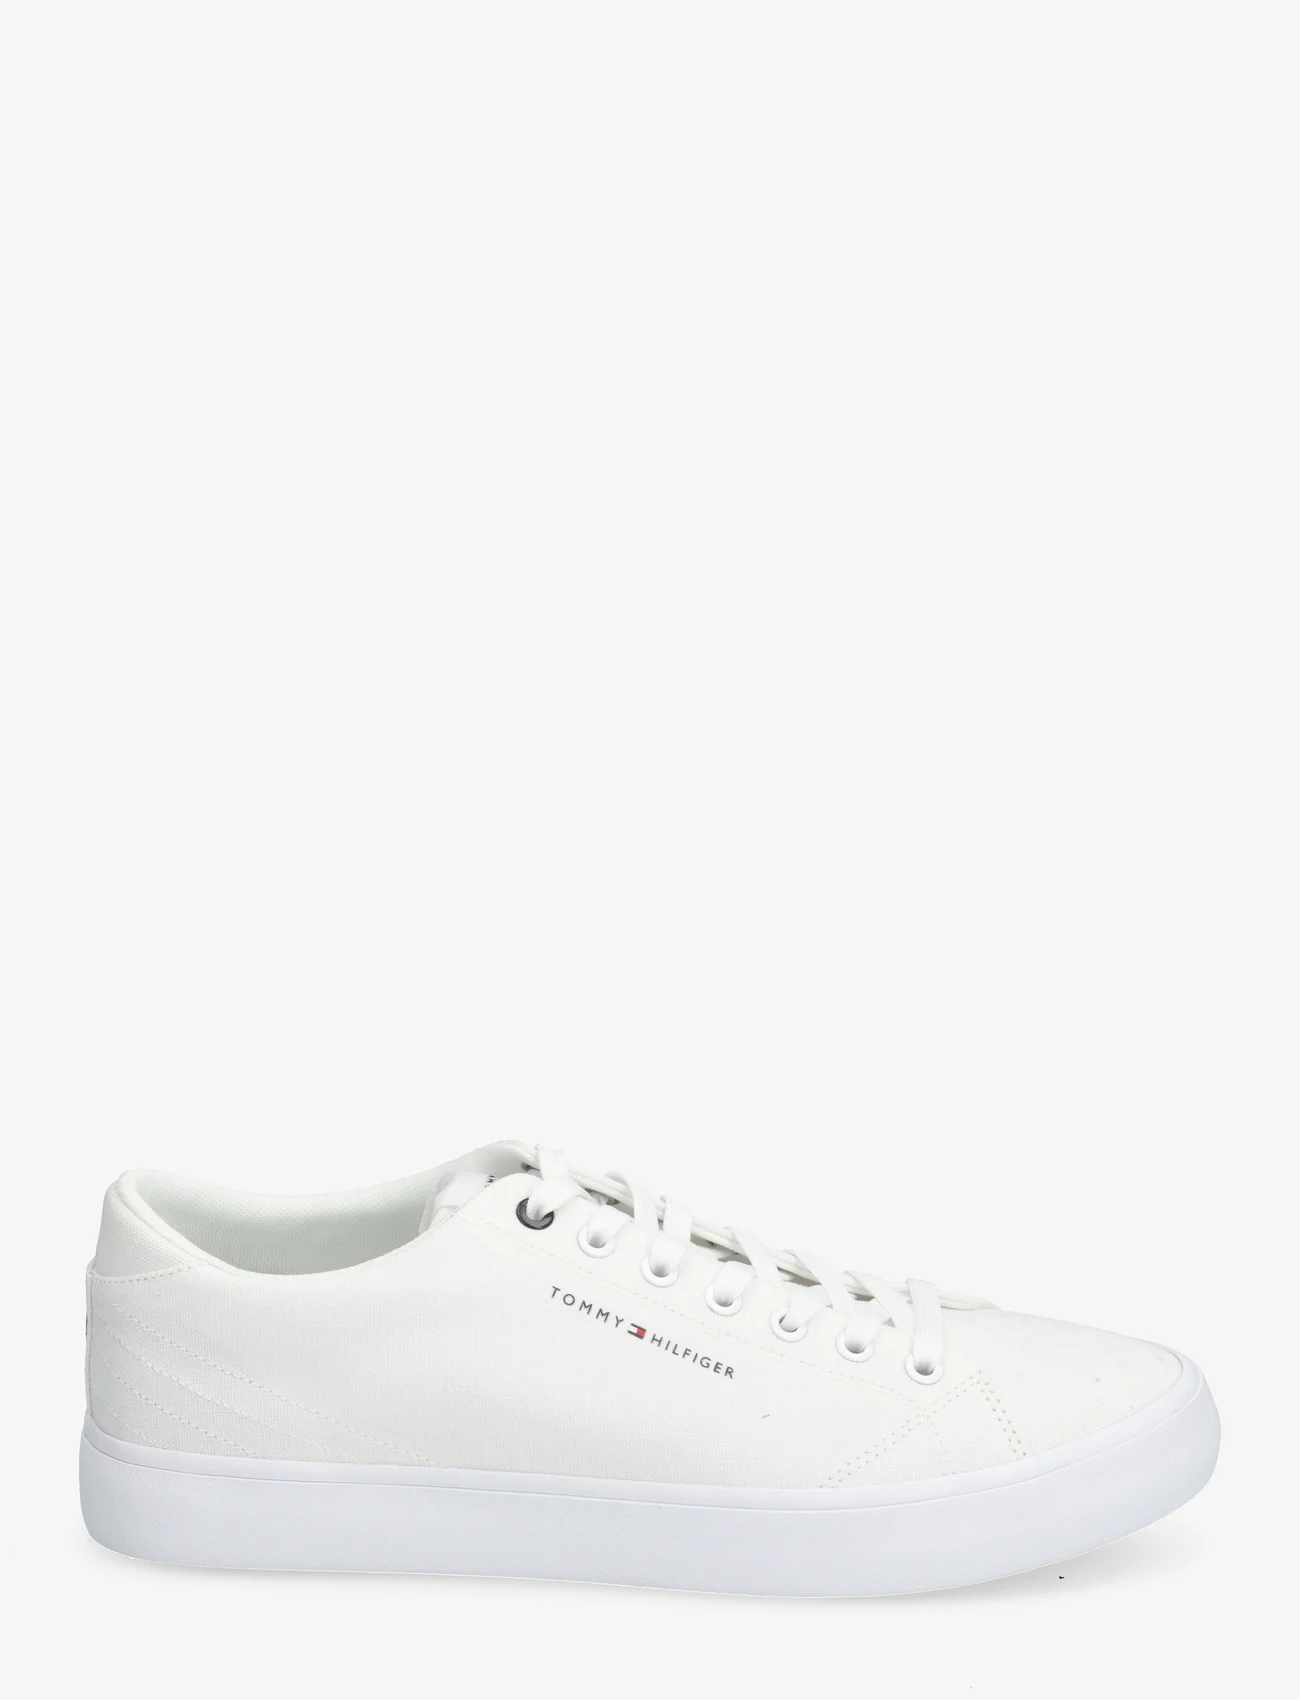 Tommy Hilfiger - TH HI VULC LOW CANVAS - laag sneakers - white - 1